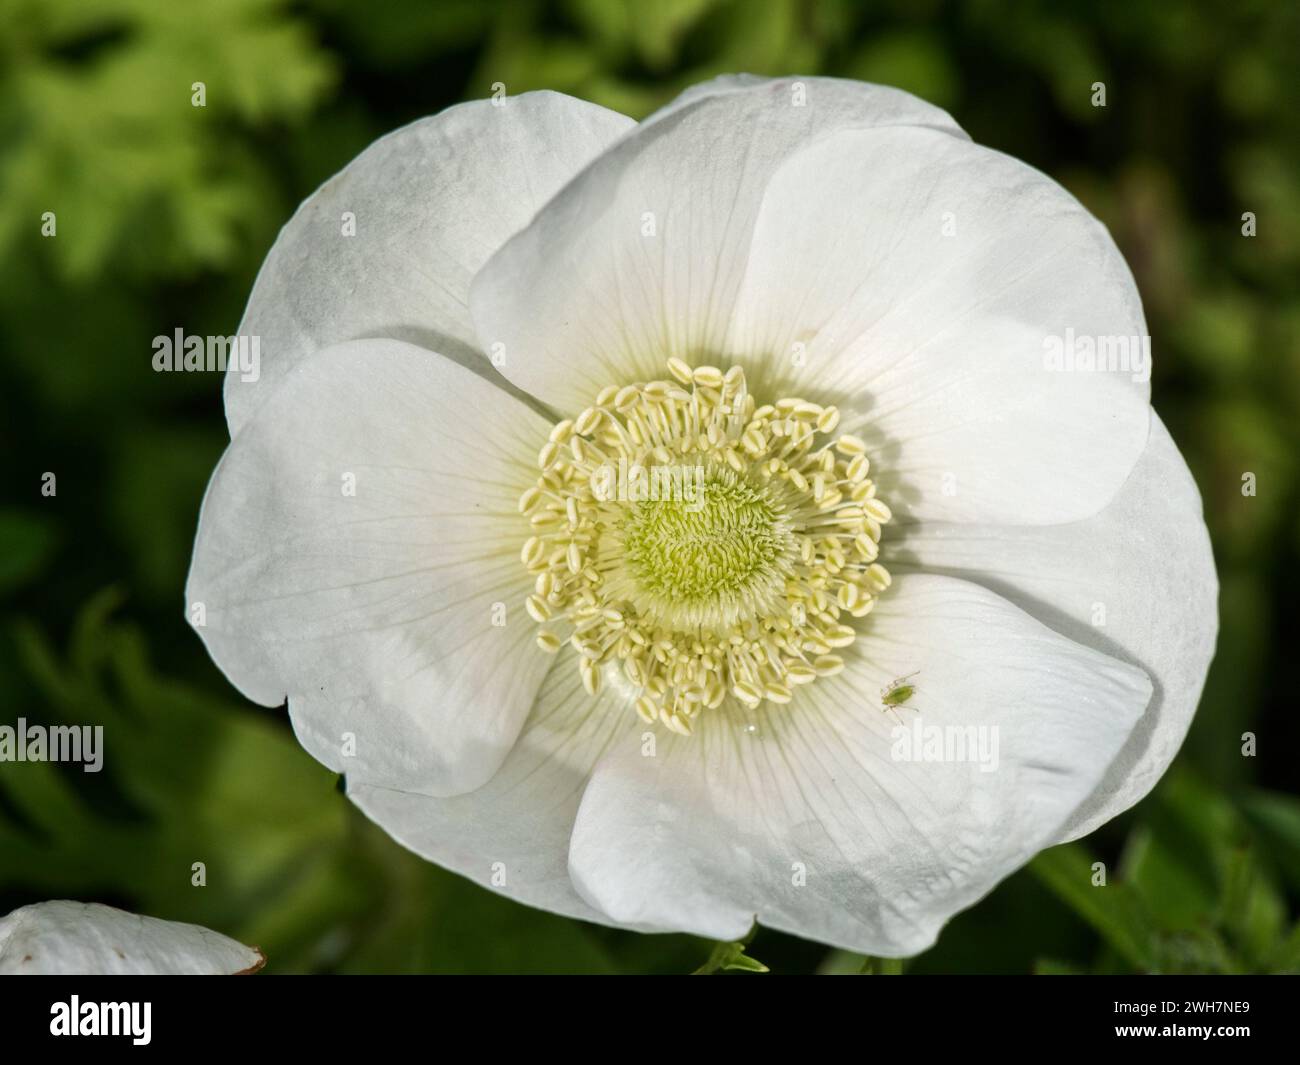 Poppy anemone (Anemone coronaria) white flower of perennial tuberous garden ornamental with petal-like tepals opening and a white centre, Berkshire, A Stock Photo